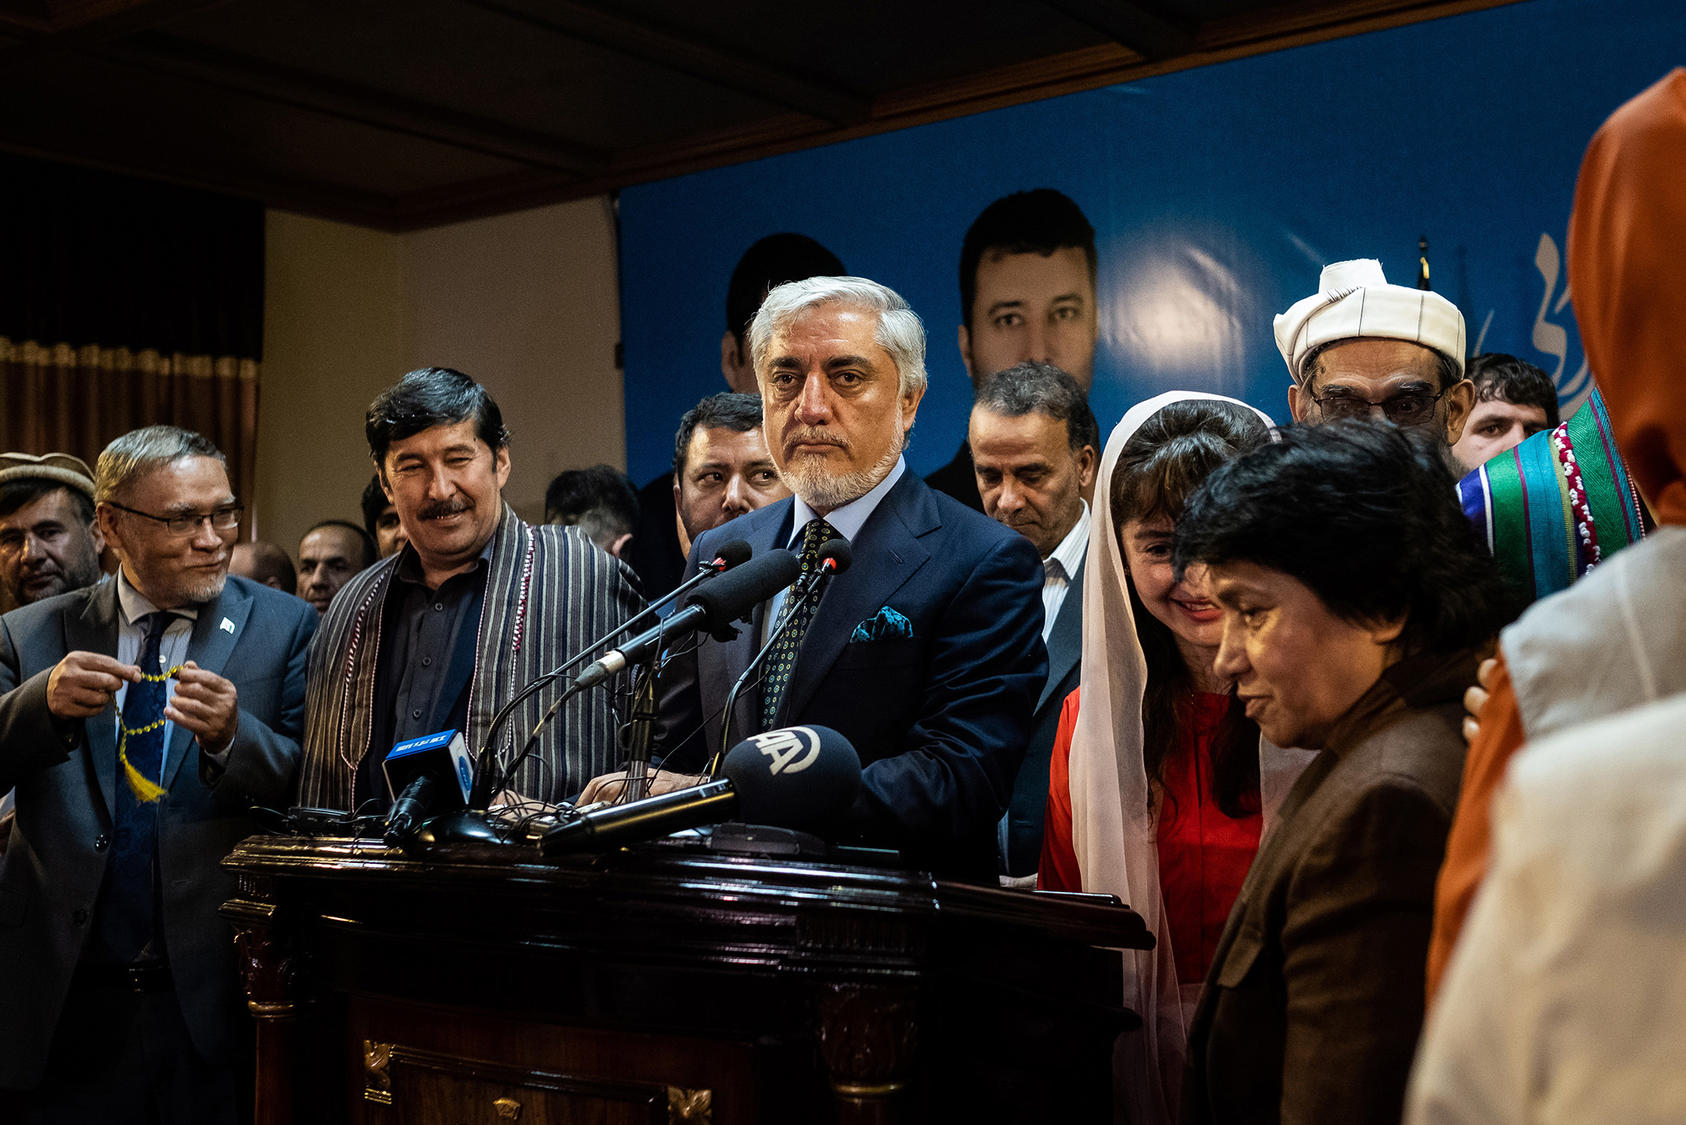 Abdullah Abdullah, the chairman of the recently established High Council of National Reconciliation, addresses a news conference in Kabul, Afghanistan, on Monday, Sept. 30, 2019. (Jim Huylebroek/The New York Times)